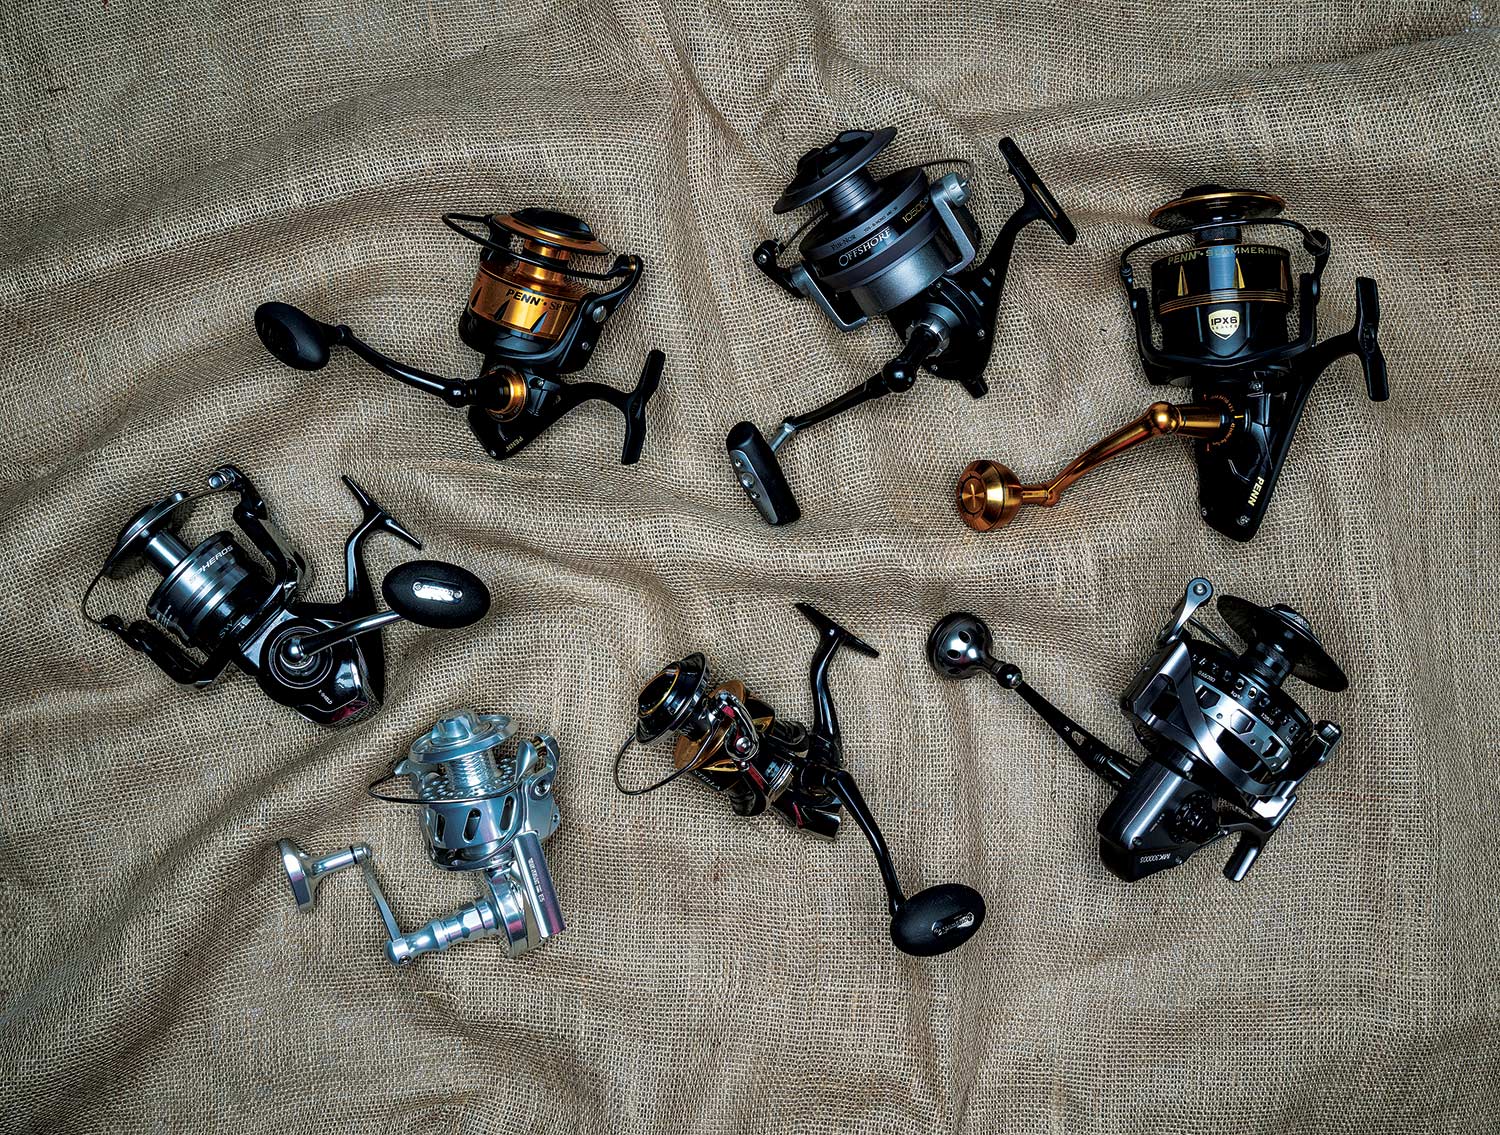 Best Spinning Reels for Offshore Fishing